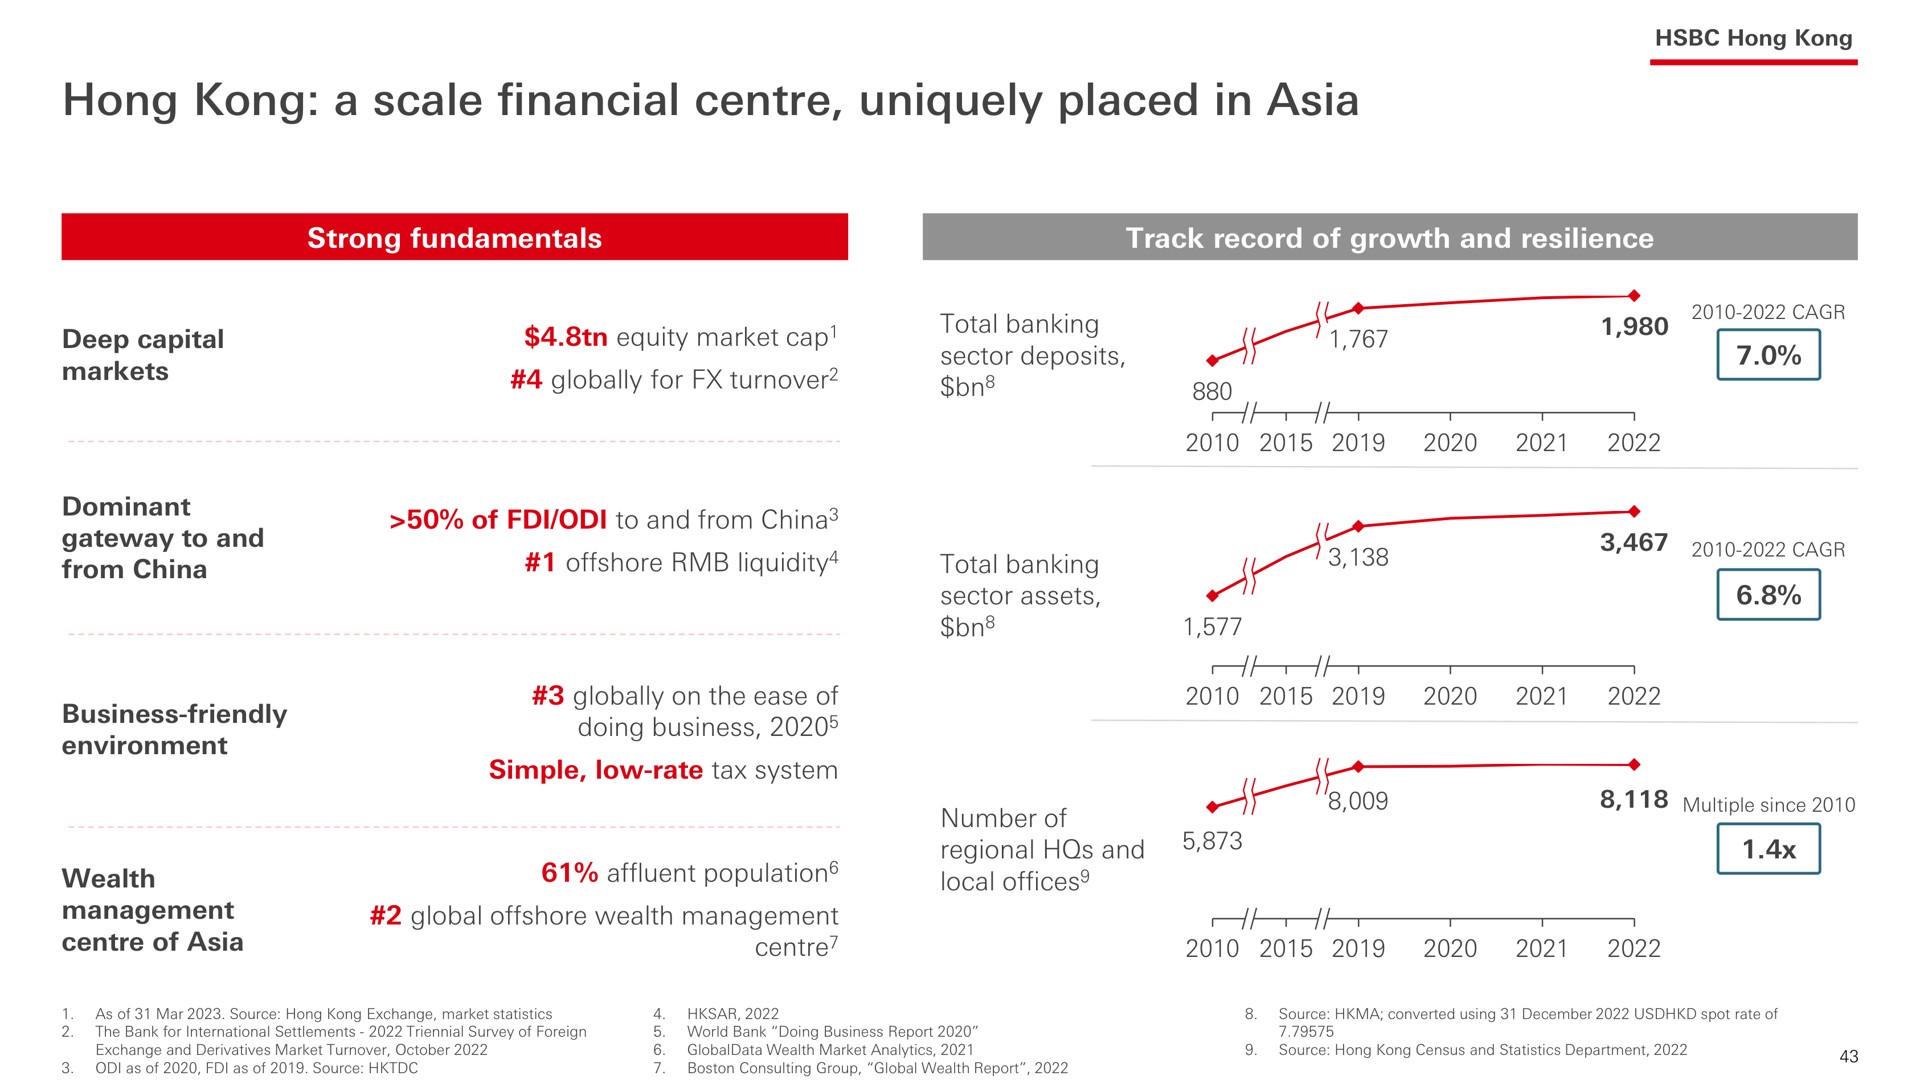 hong a scale financial uniquely placed in | HSBC